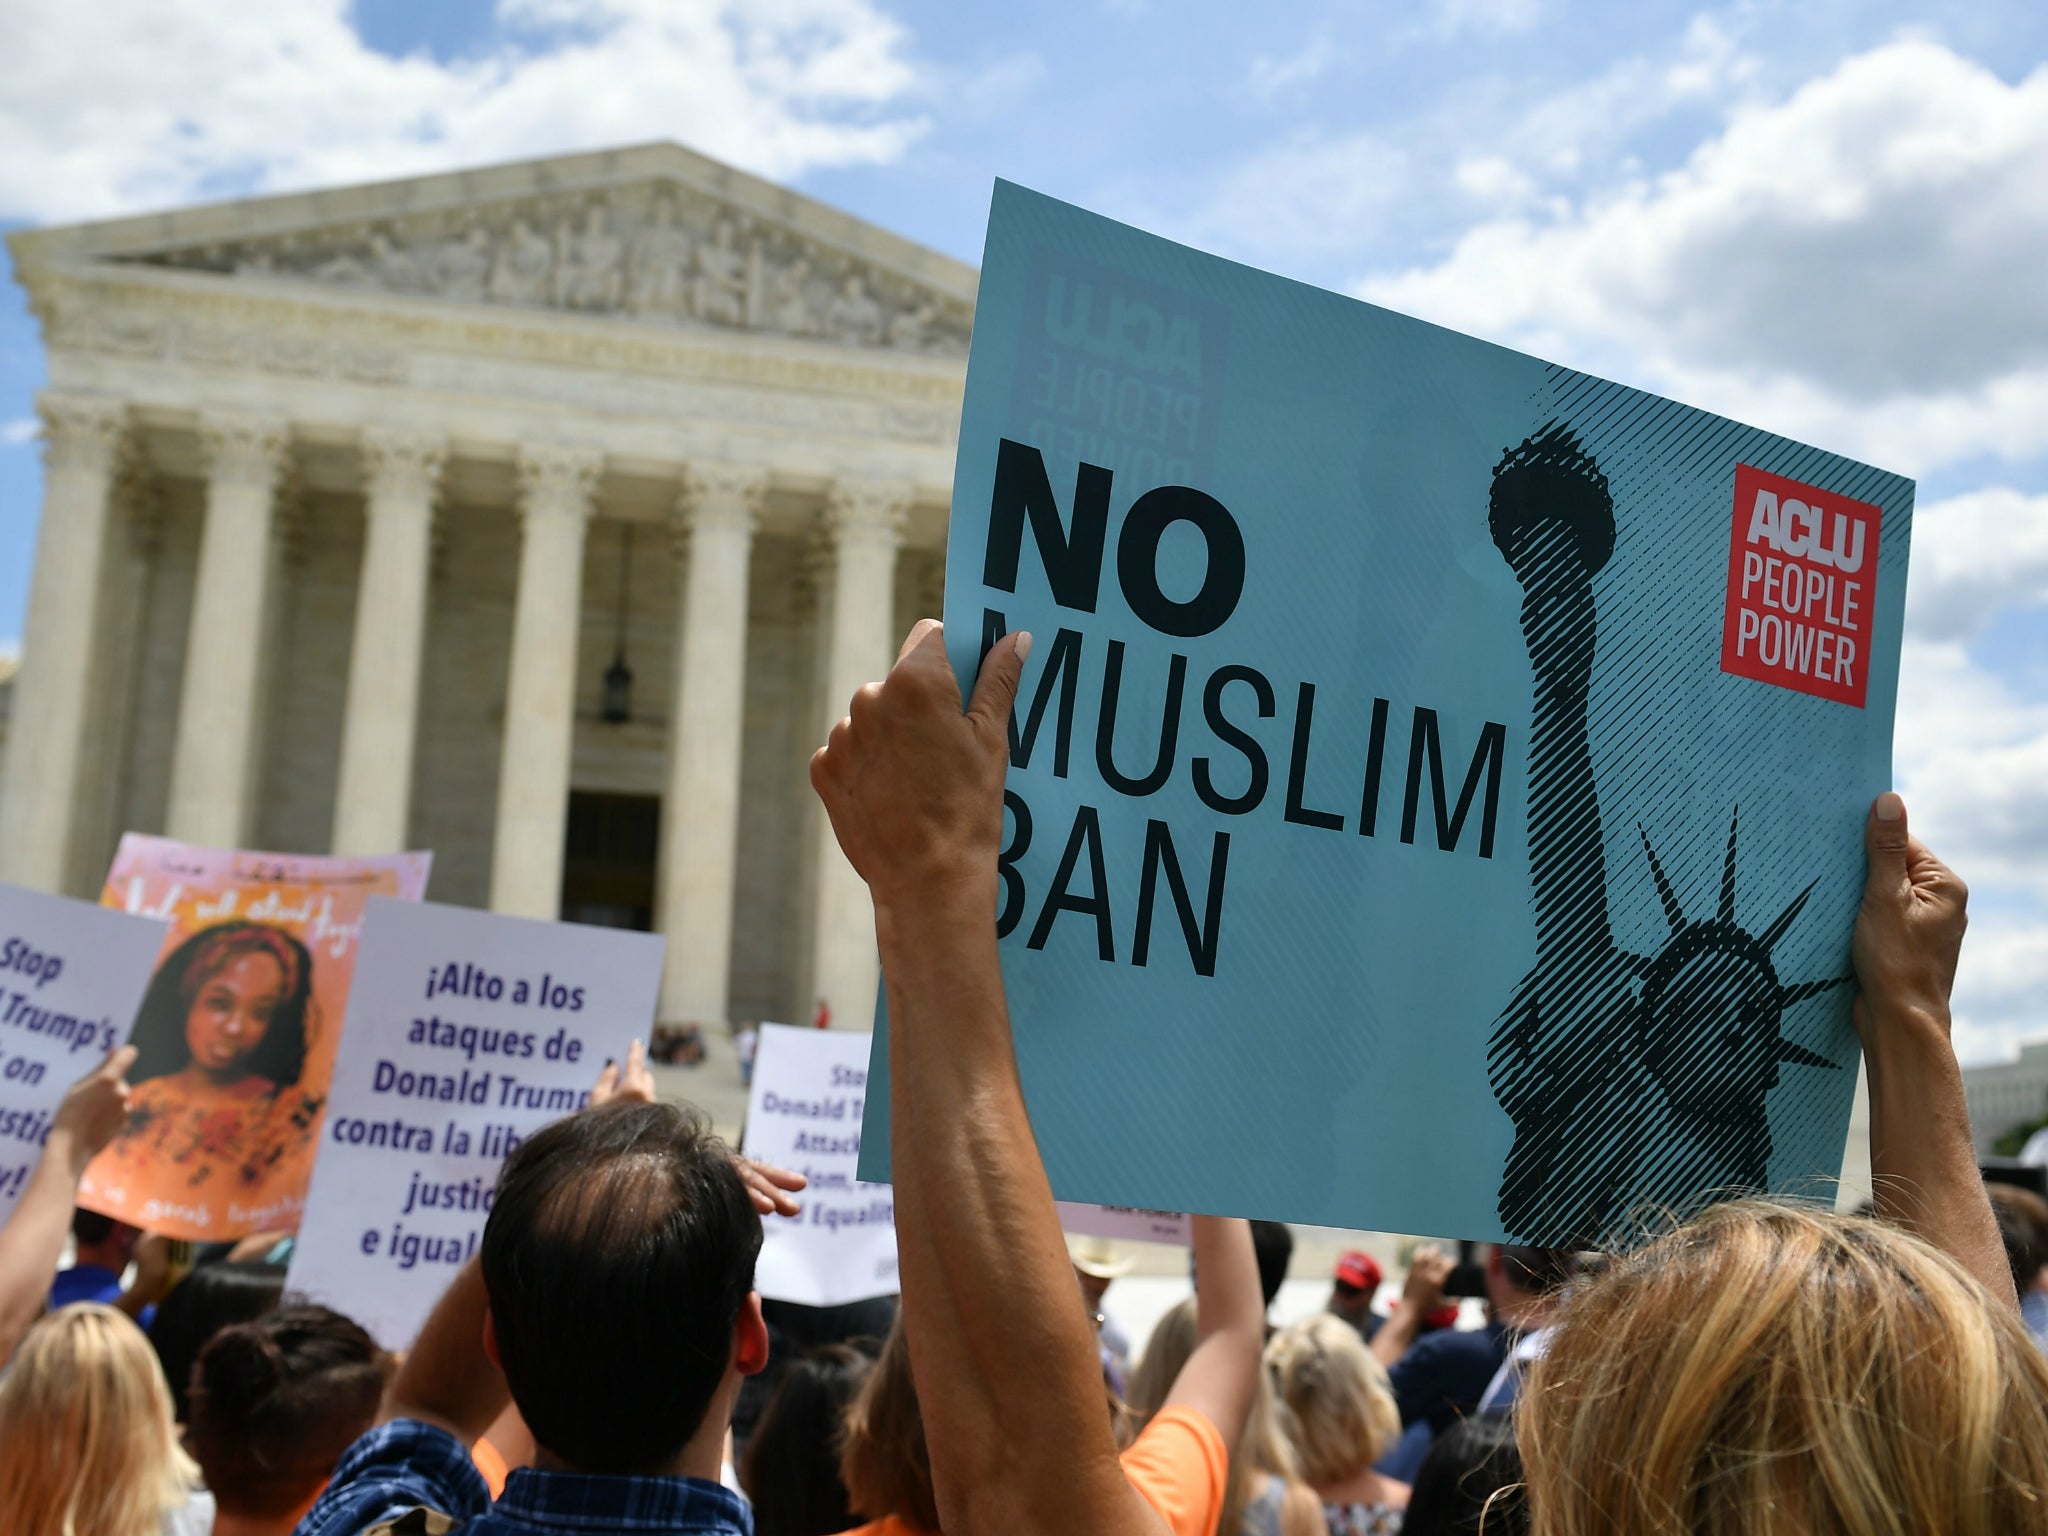 People protest the Muslim travel ban outside of the US Supreme Court in Washington, DC on 26 June 2018 just before the court upheld Donald Trump's travel ban.